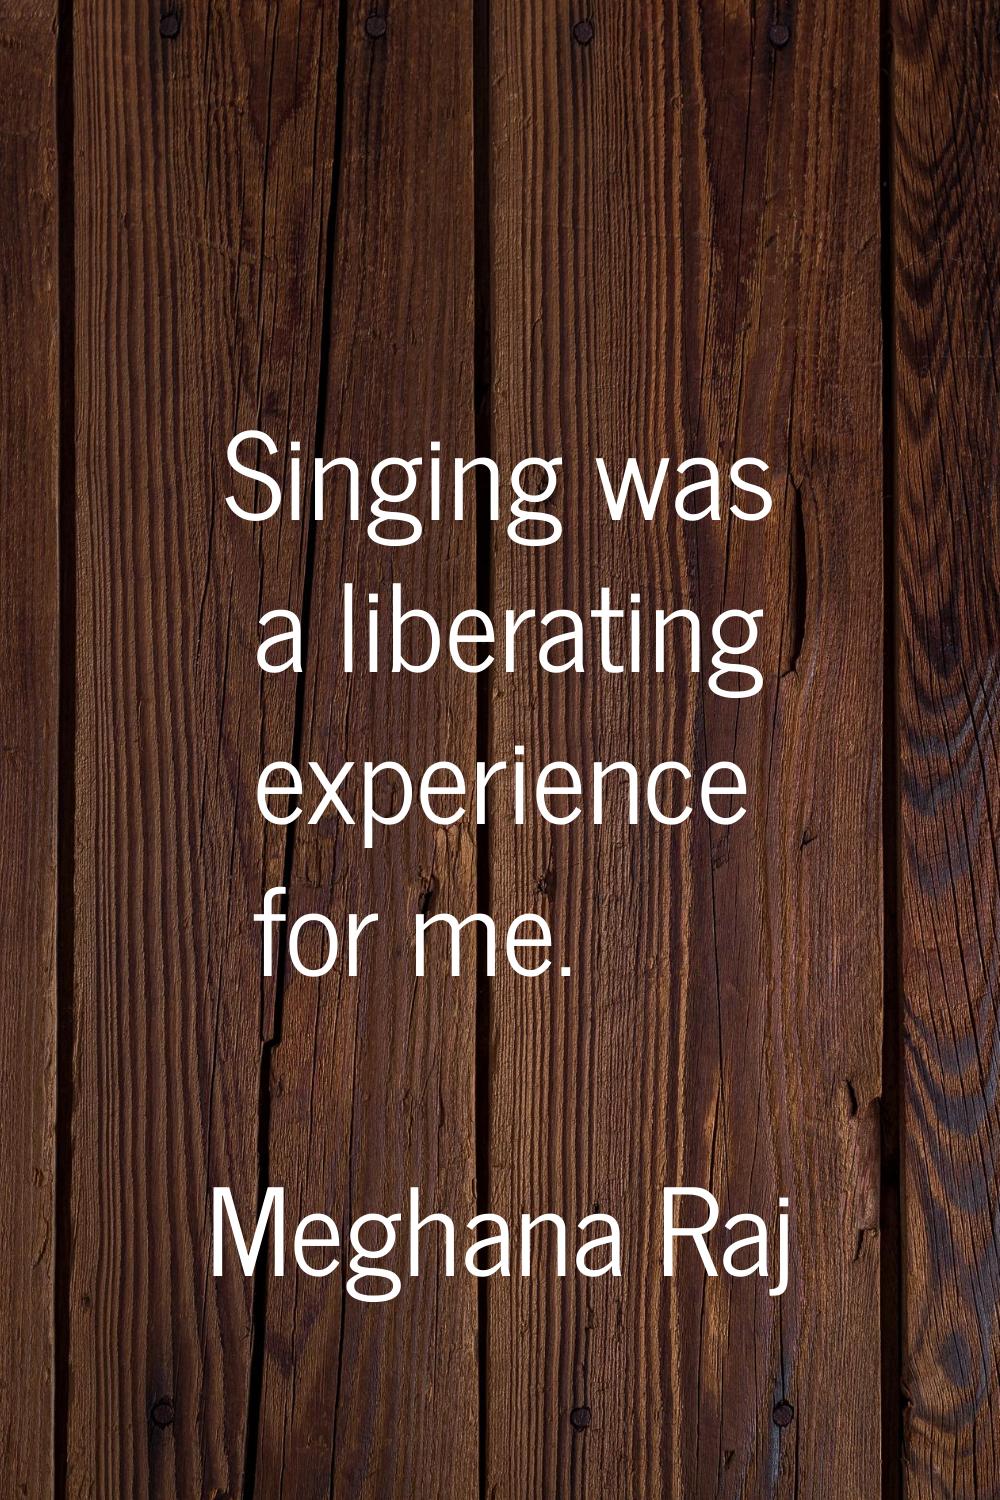 Singing was a liberating experience for me.